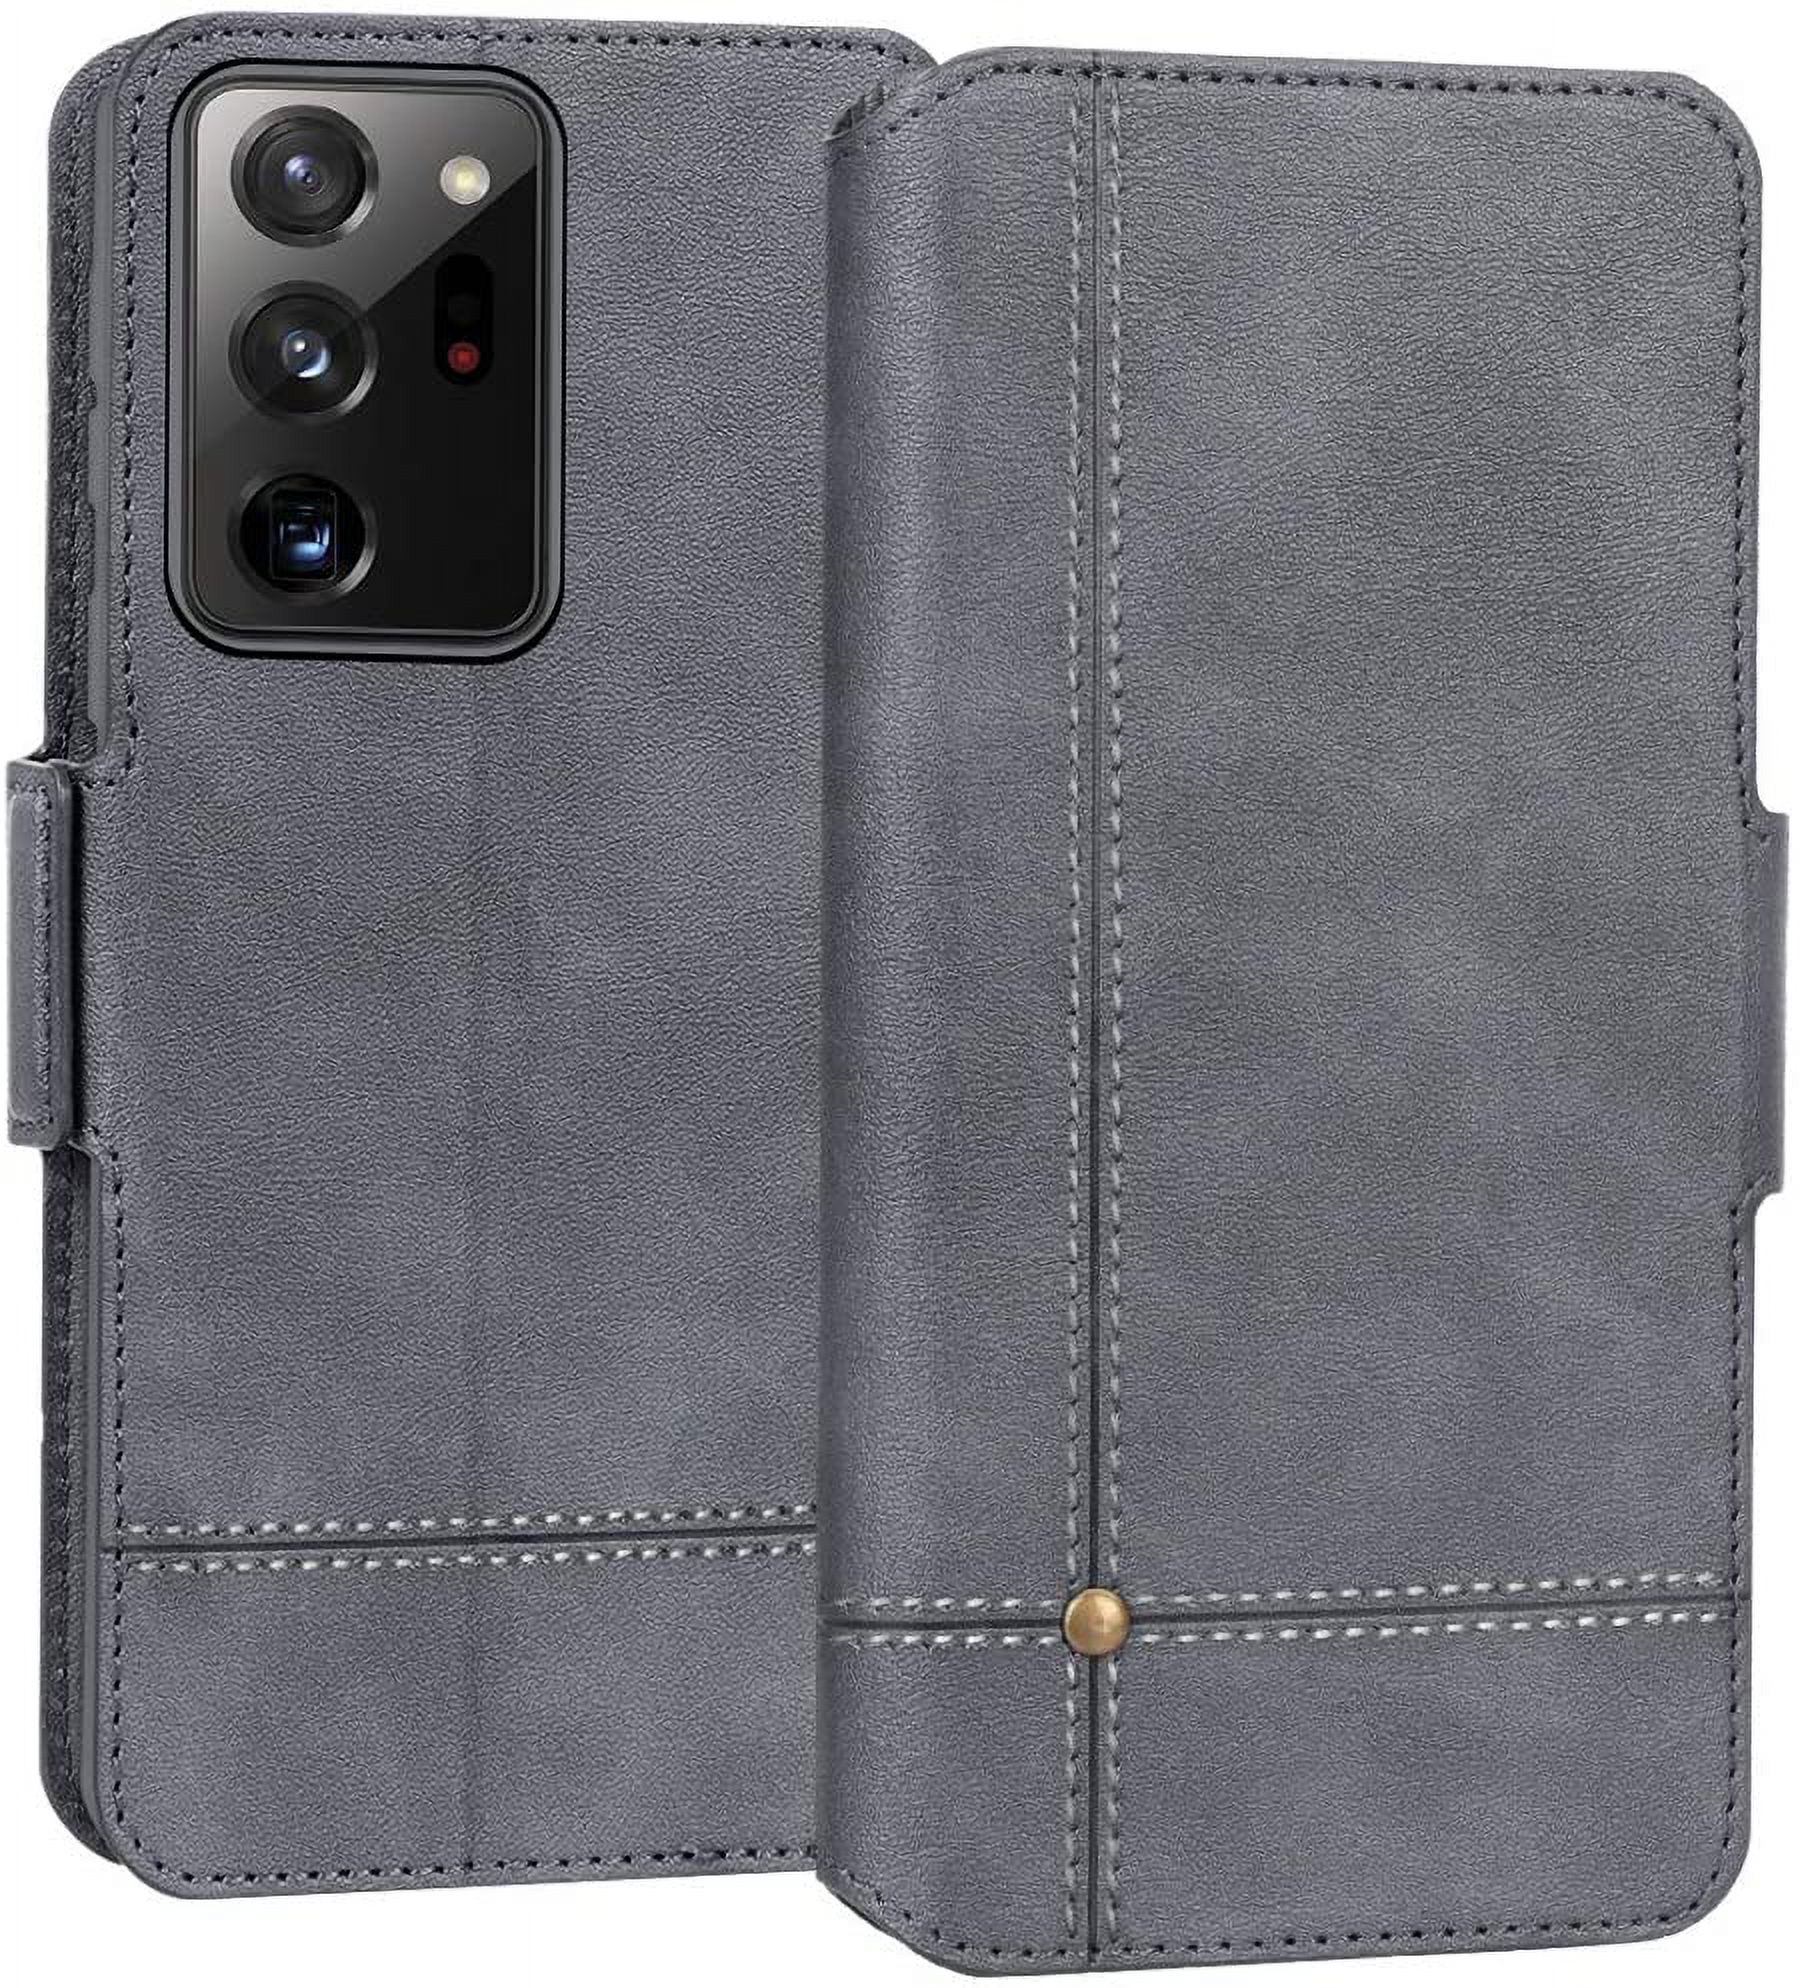 Case for Samsung Galaxy Note 20 Ultra, Ultra Slim Flip Leather Wallet Phone Case Protective Shockproof Cover with Card Holder Kickstand Folio Case for Samsung Galaxy Note 20 Ultra 5G 6.9' Grey - image 1 of 3